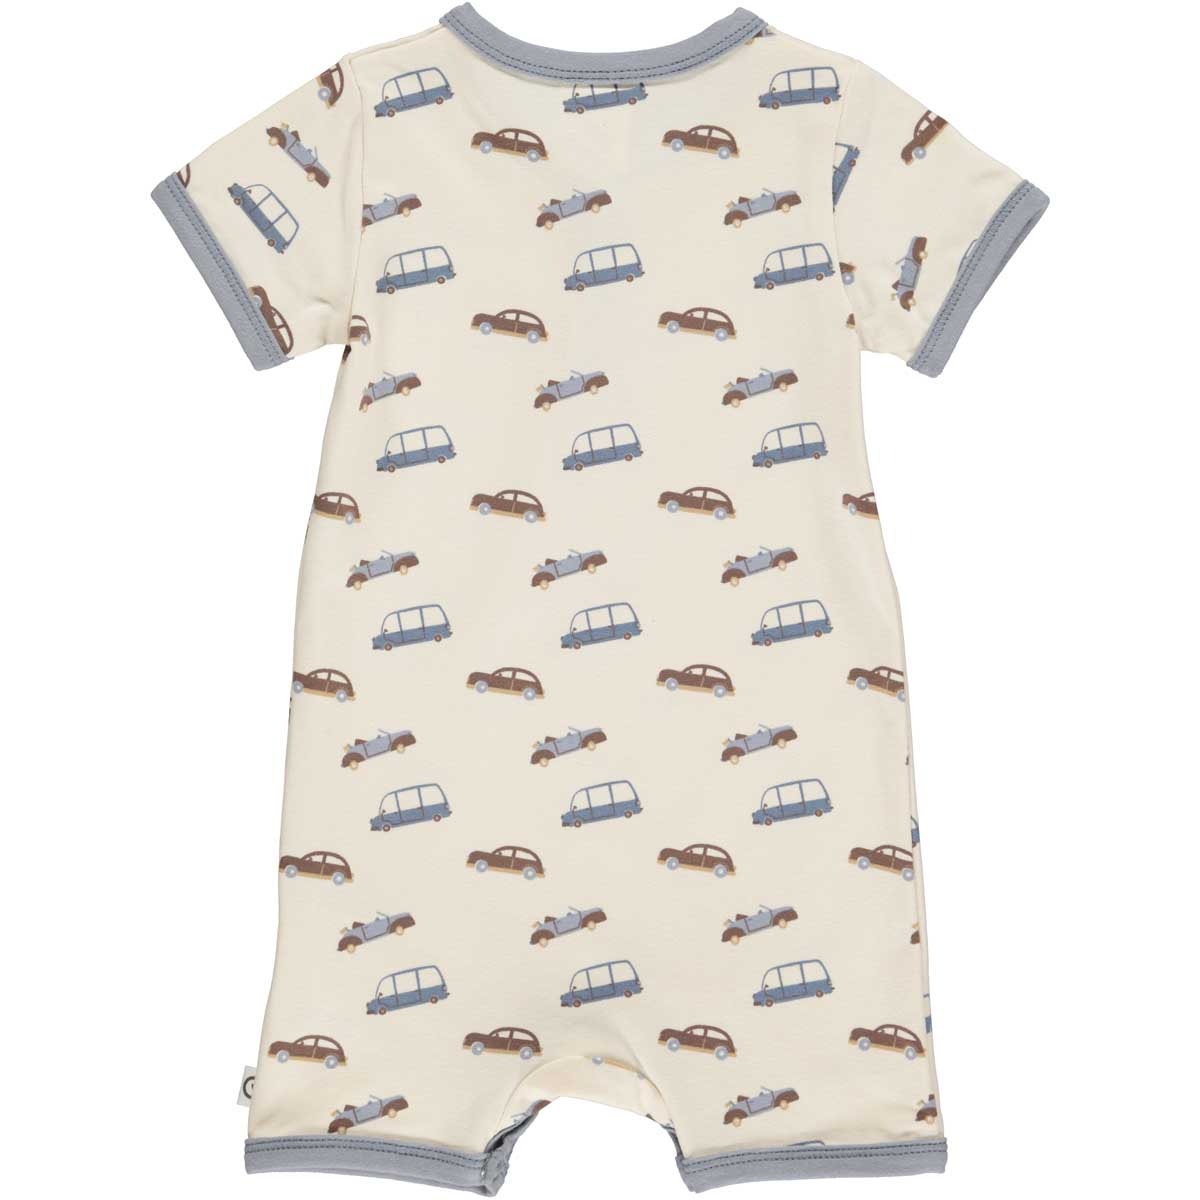 MAMA.LICIOUS Baby one-piece suit -Buttercream - 1583042100